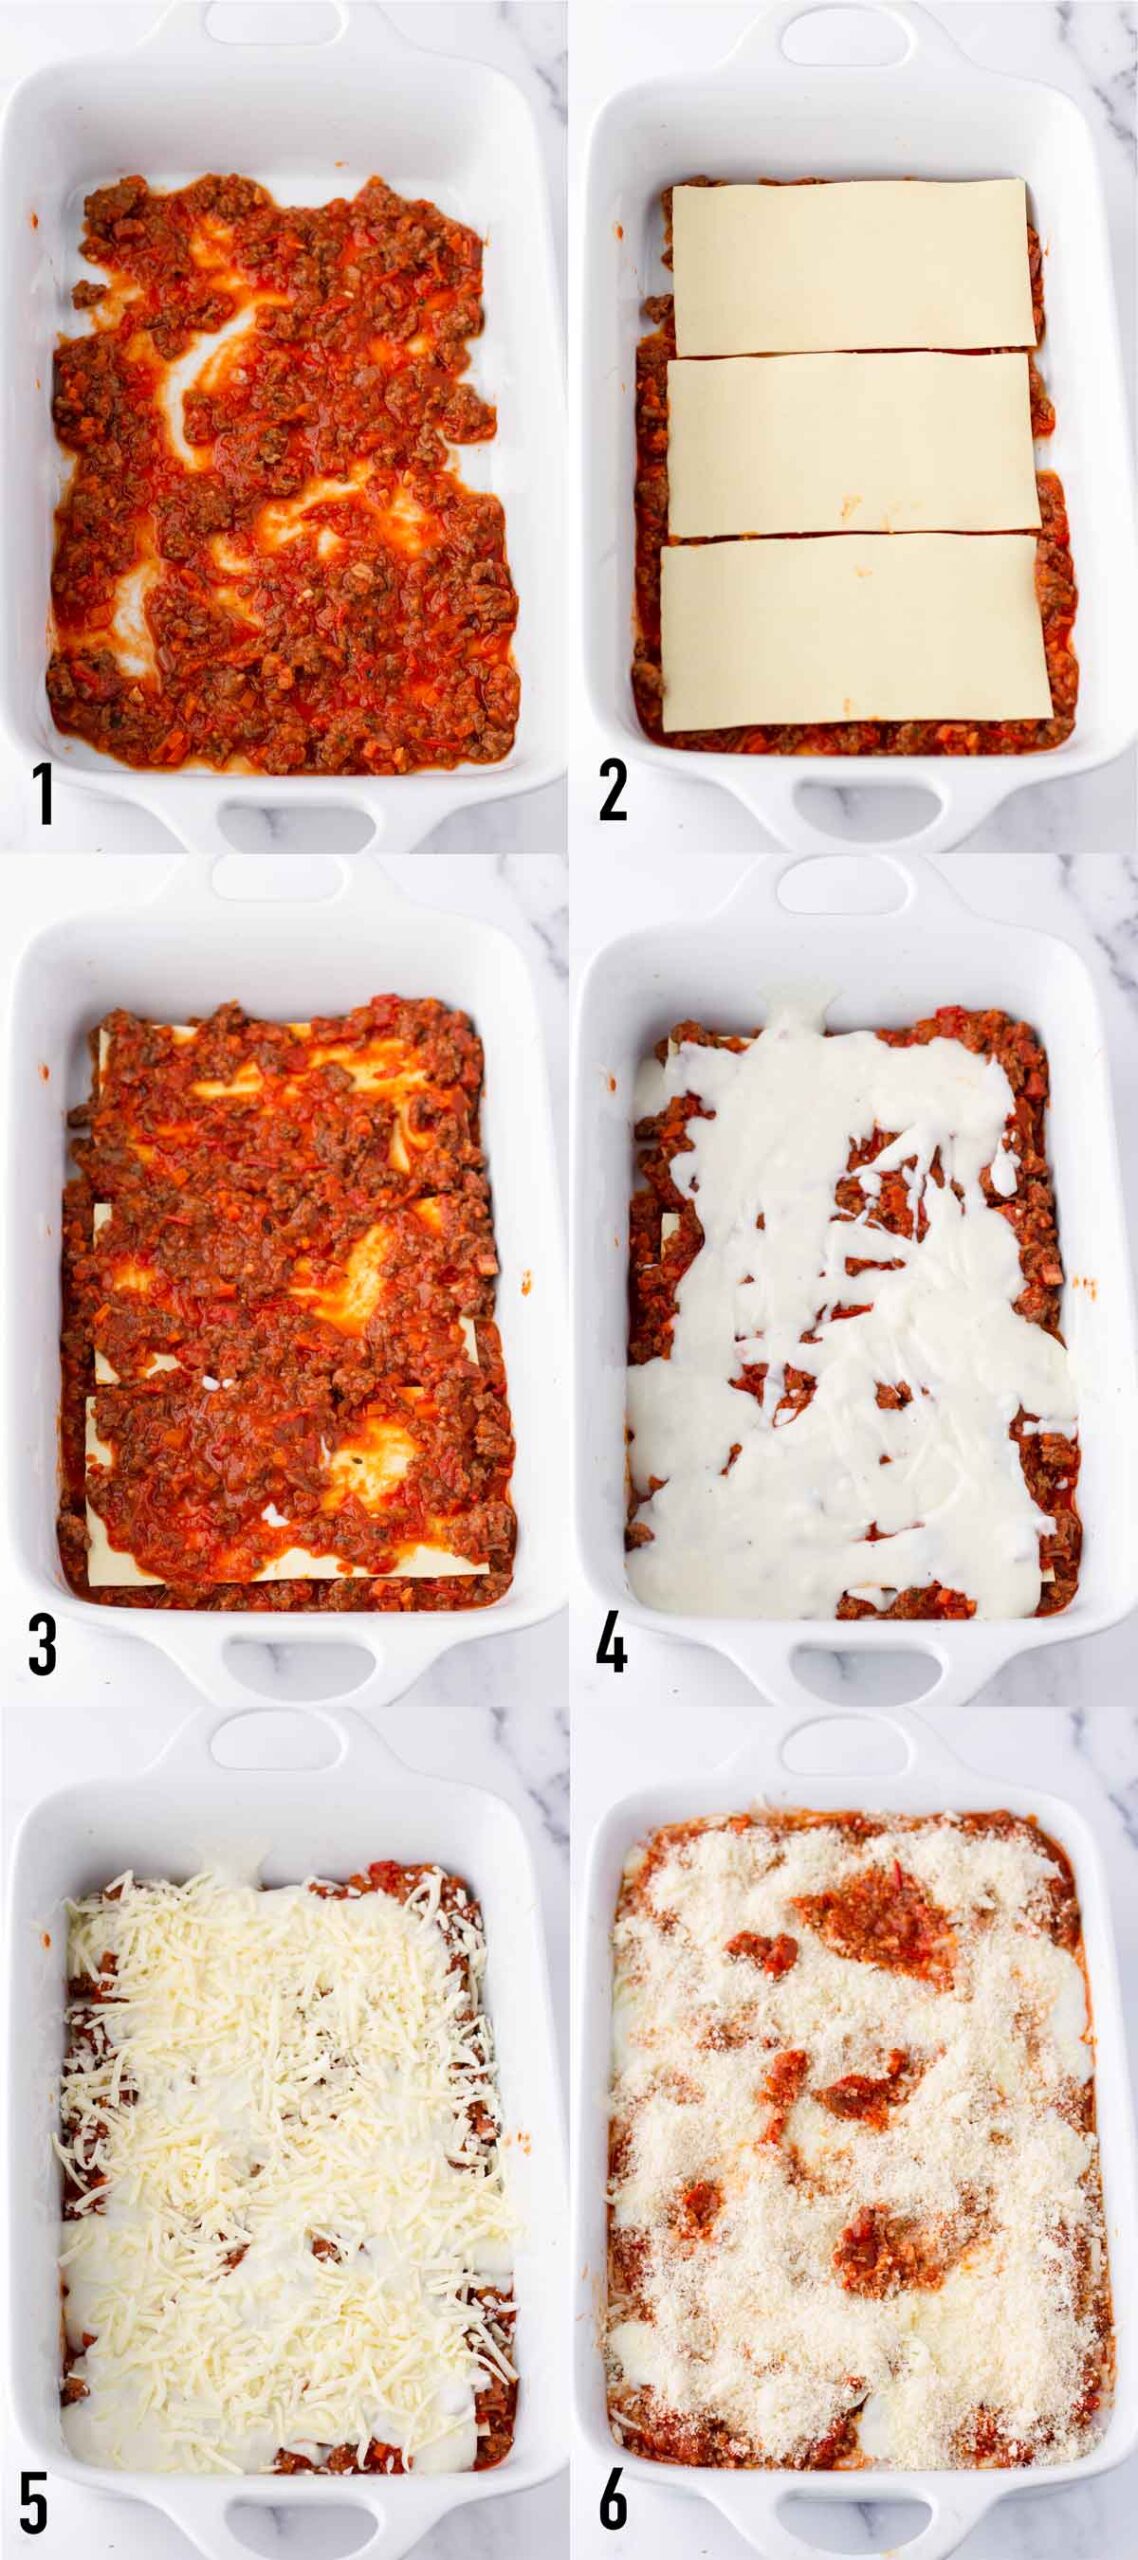 steps by step assembling lasagna in a baking dish